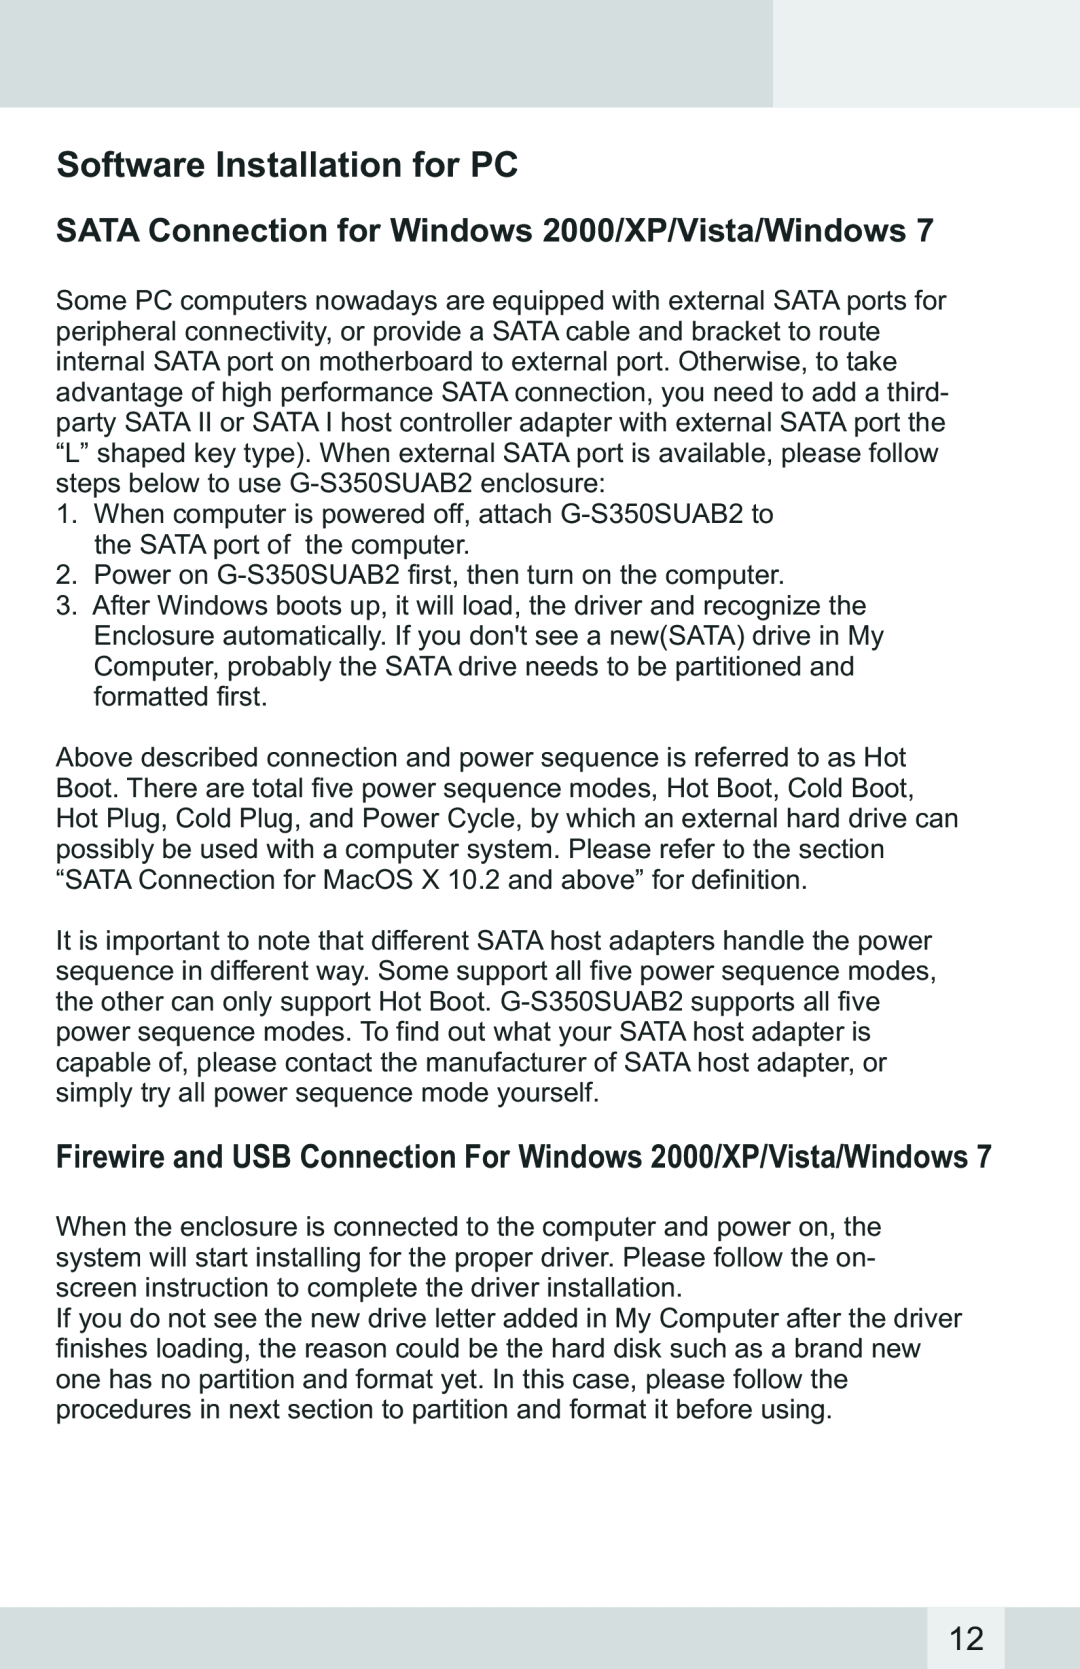 Macally G-S350SUAB2 manual Software Installation for PC, SATA Connection for Windows 2000/XP/Vista/Windows 